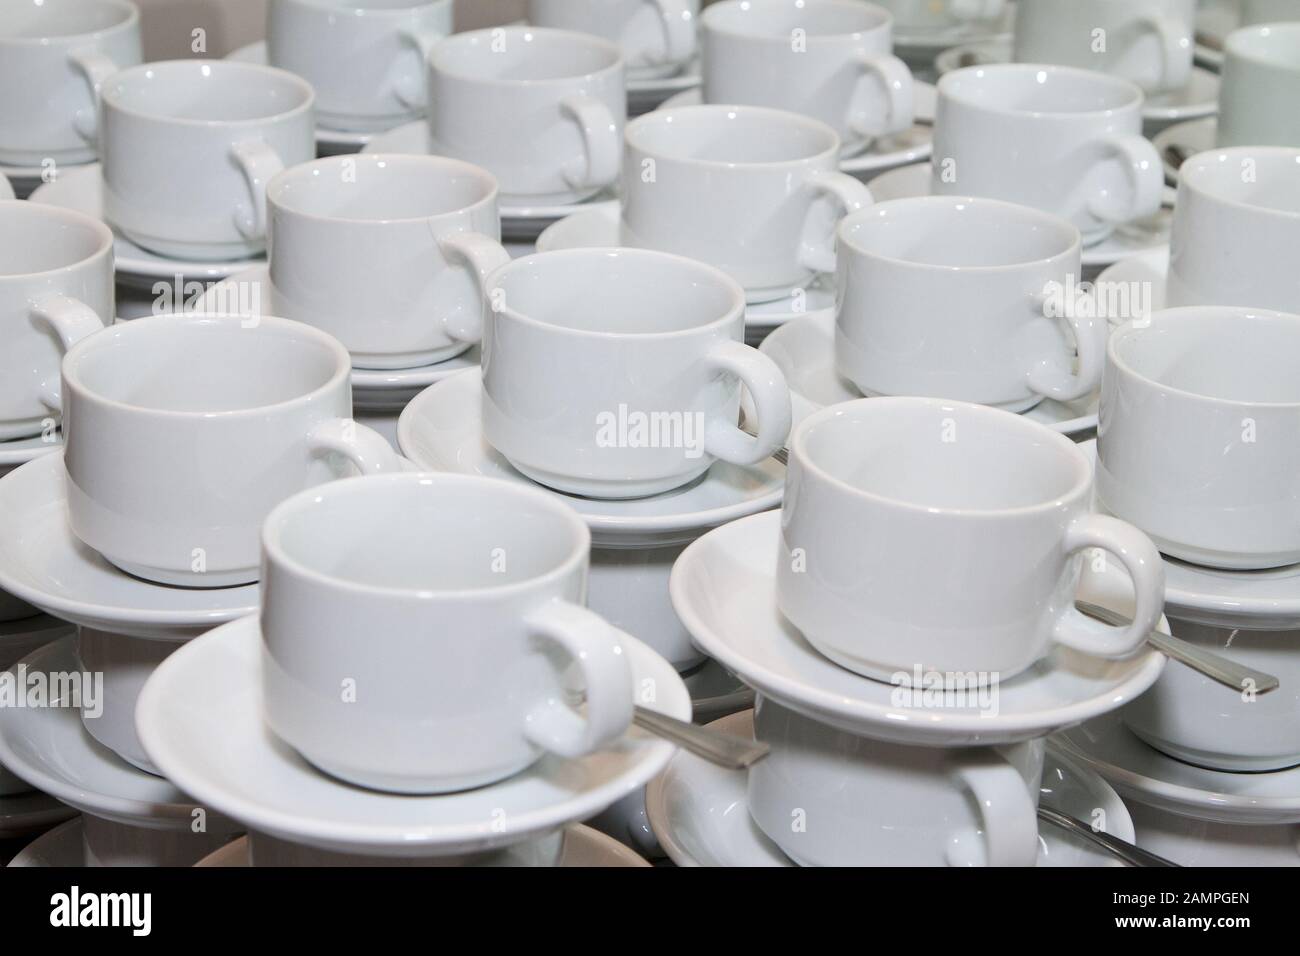 Rows of stacked cups and saucers ready for service. Stock Photo